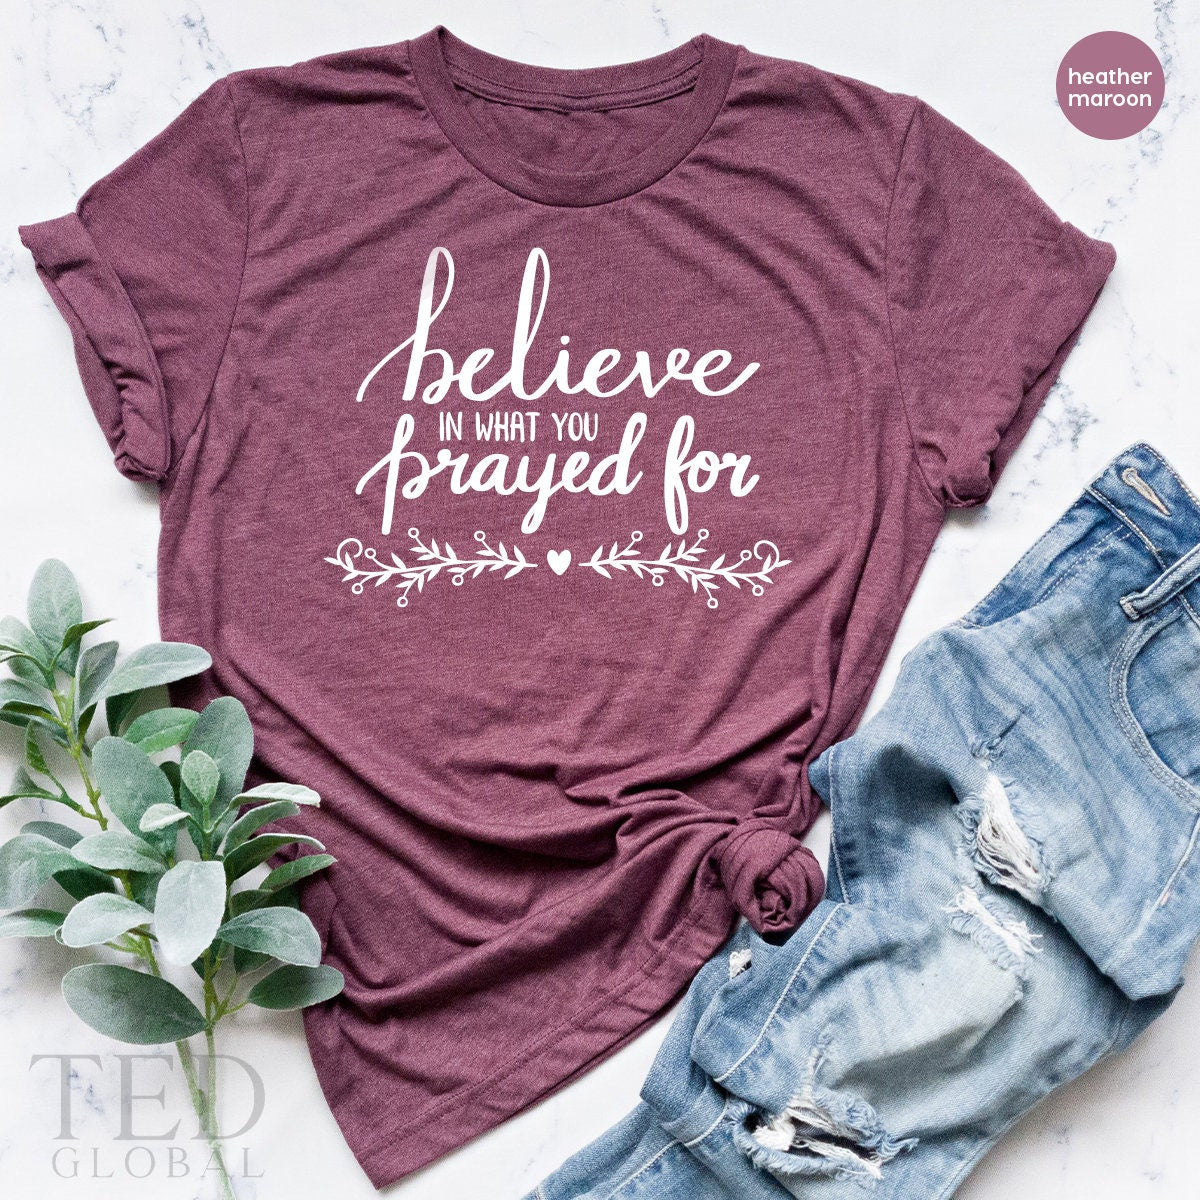 Religious TShirt,Believer T Shirt,Christian T Shirt,Inspirational Shirt,Church T-Shirts,Believe In What You Prayed For Shirt,Blessed Shirt - Fastdeliverytees.com